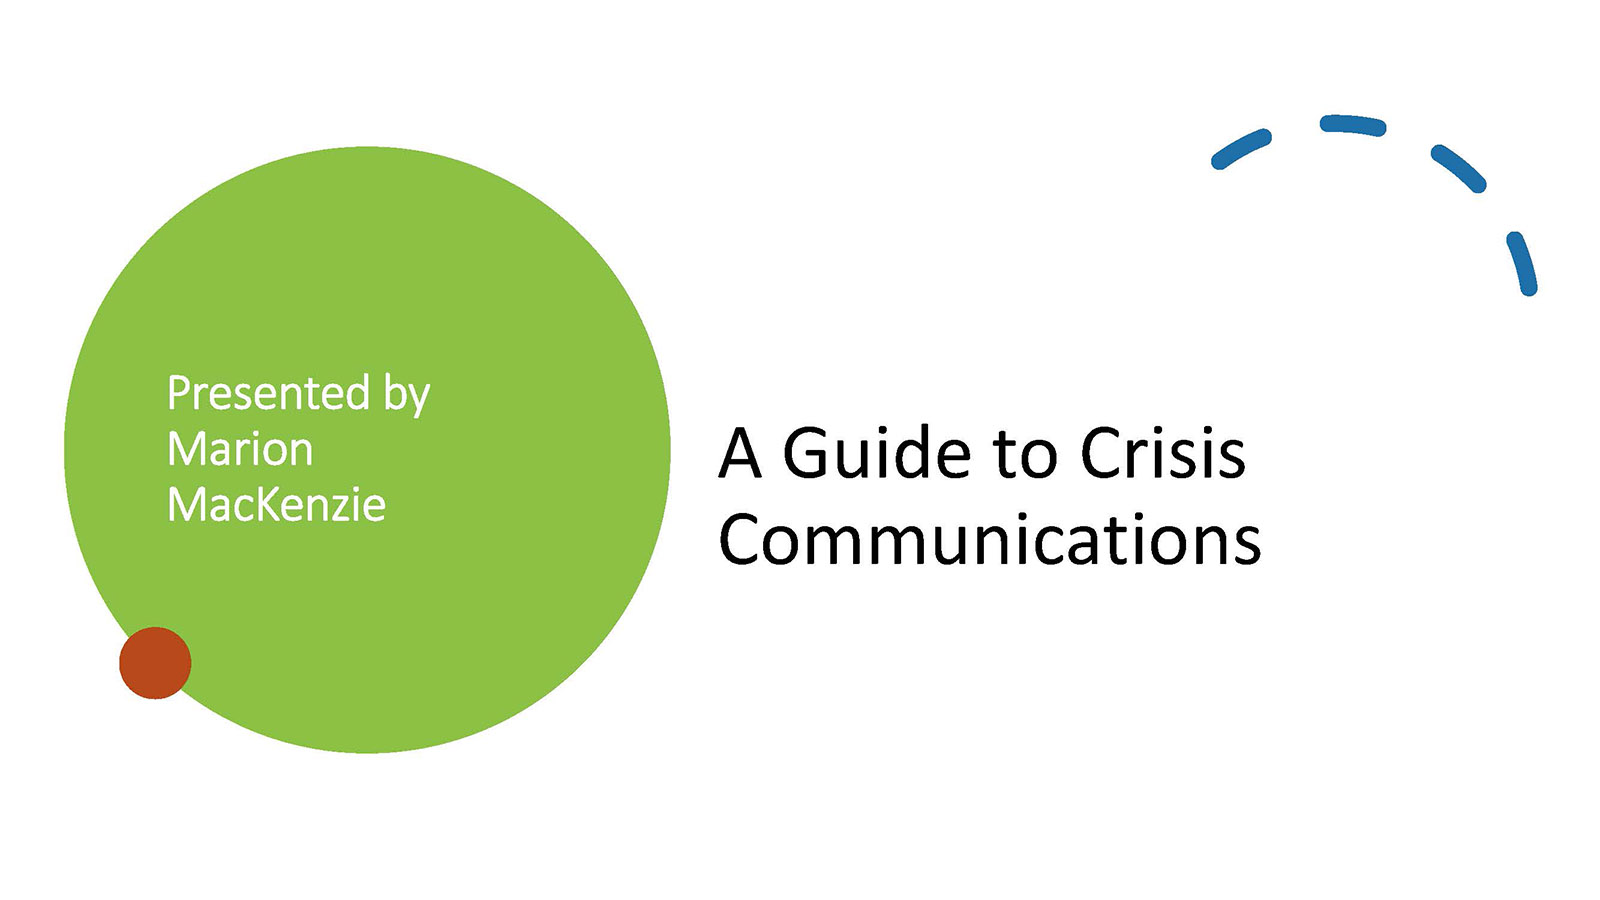 A Guide to Crisis Communications